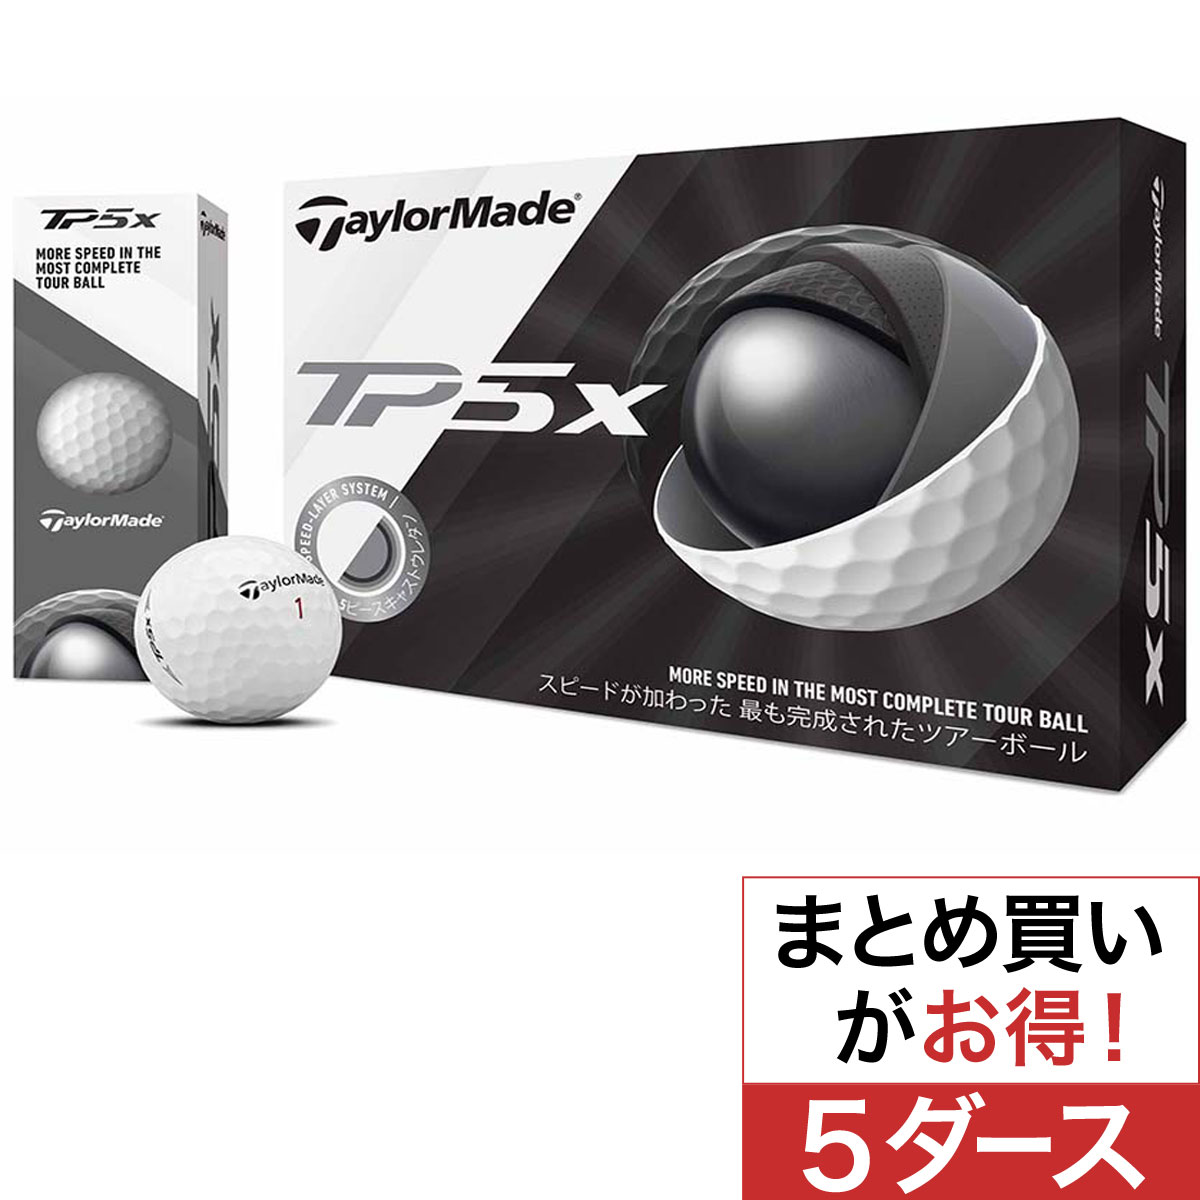  TP5x ボール 5ダースセット 